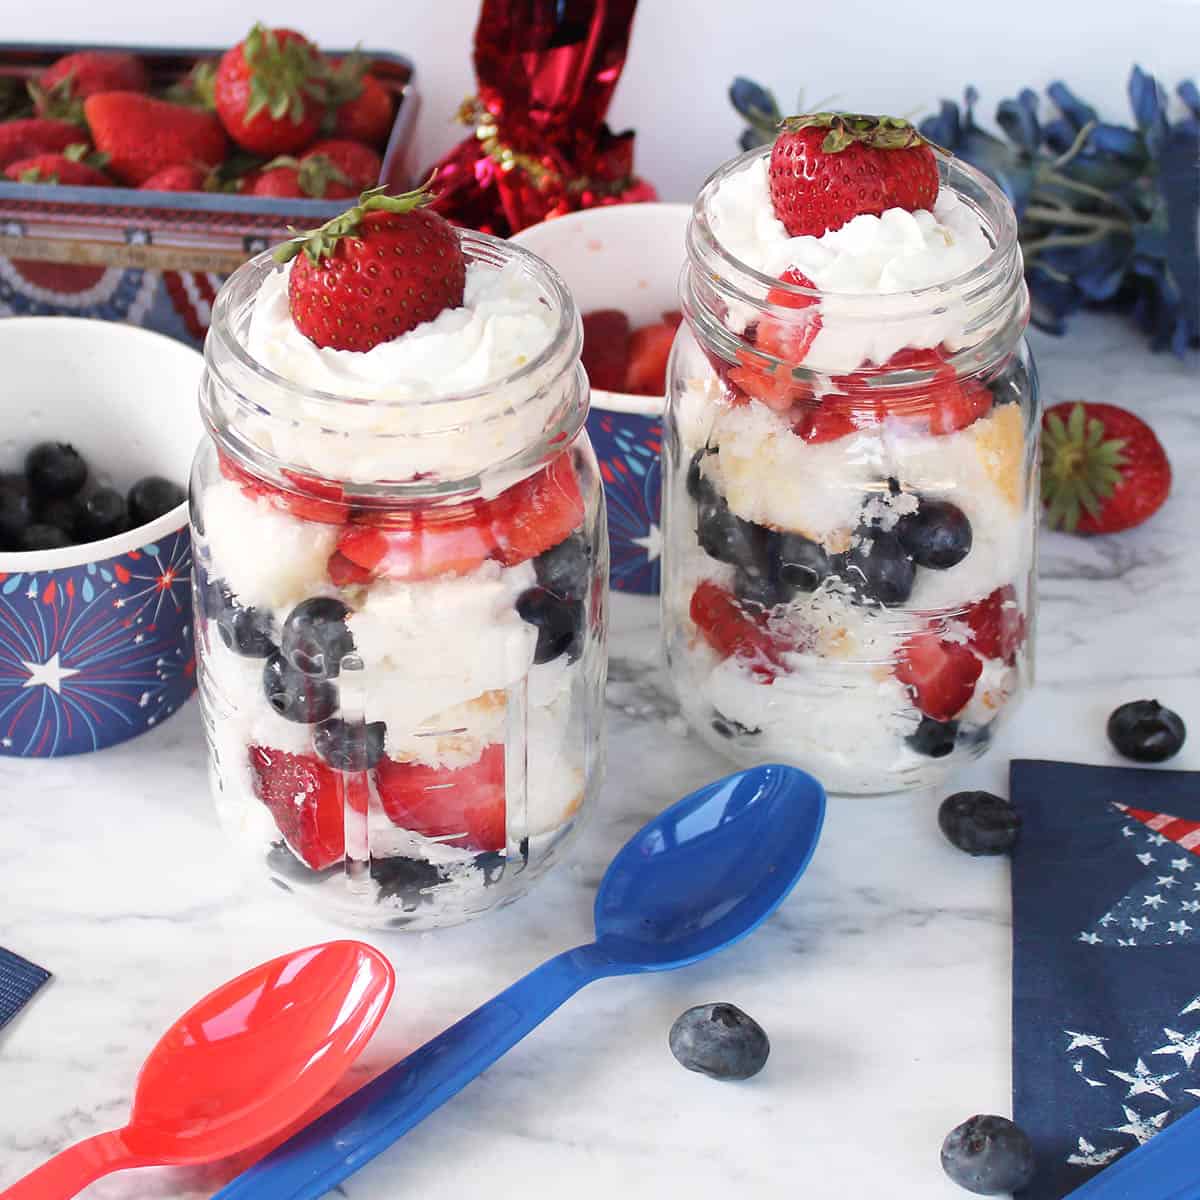 2 Patriotic Parfaits ready to serve with colored spoons and berries around.